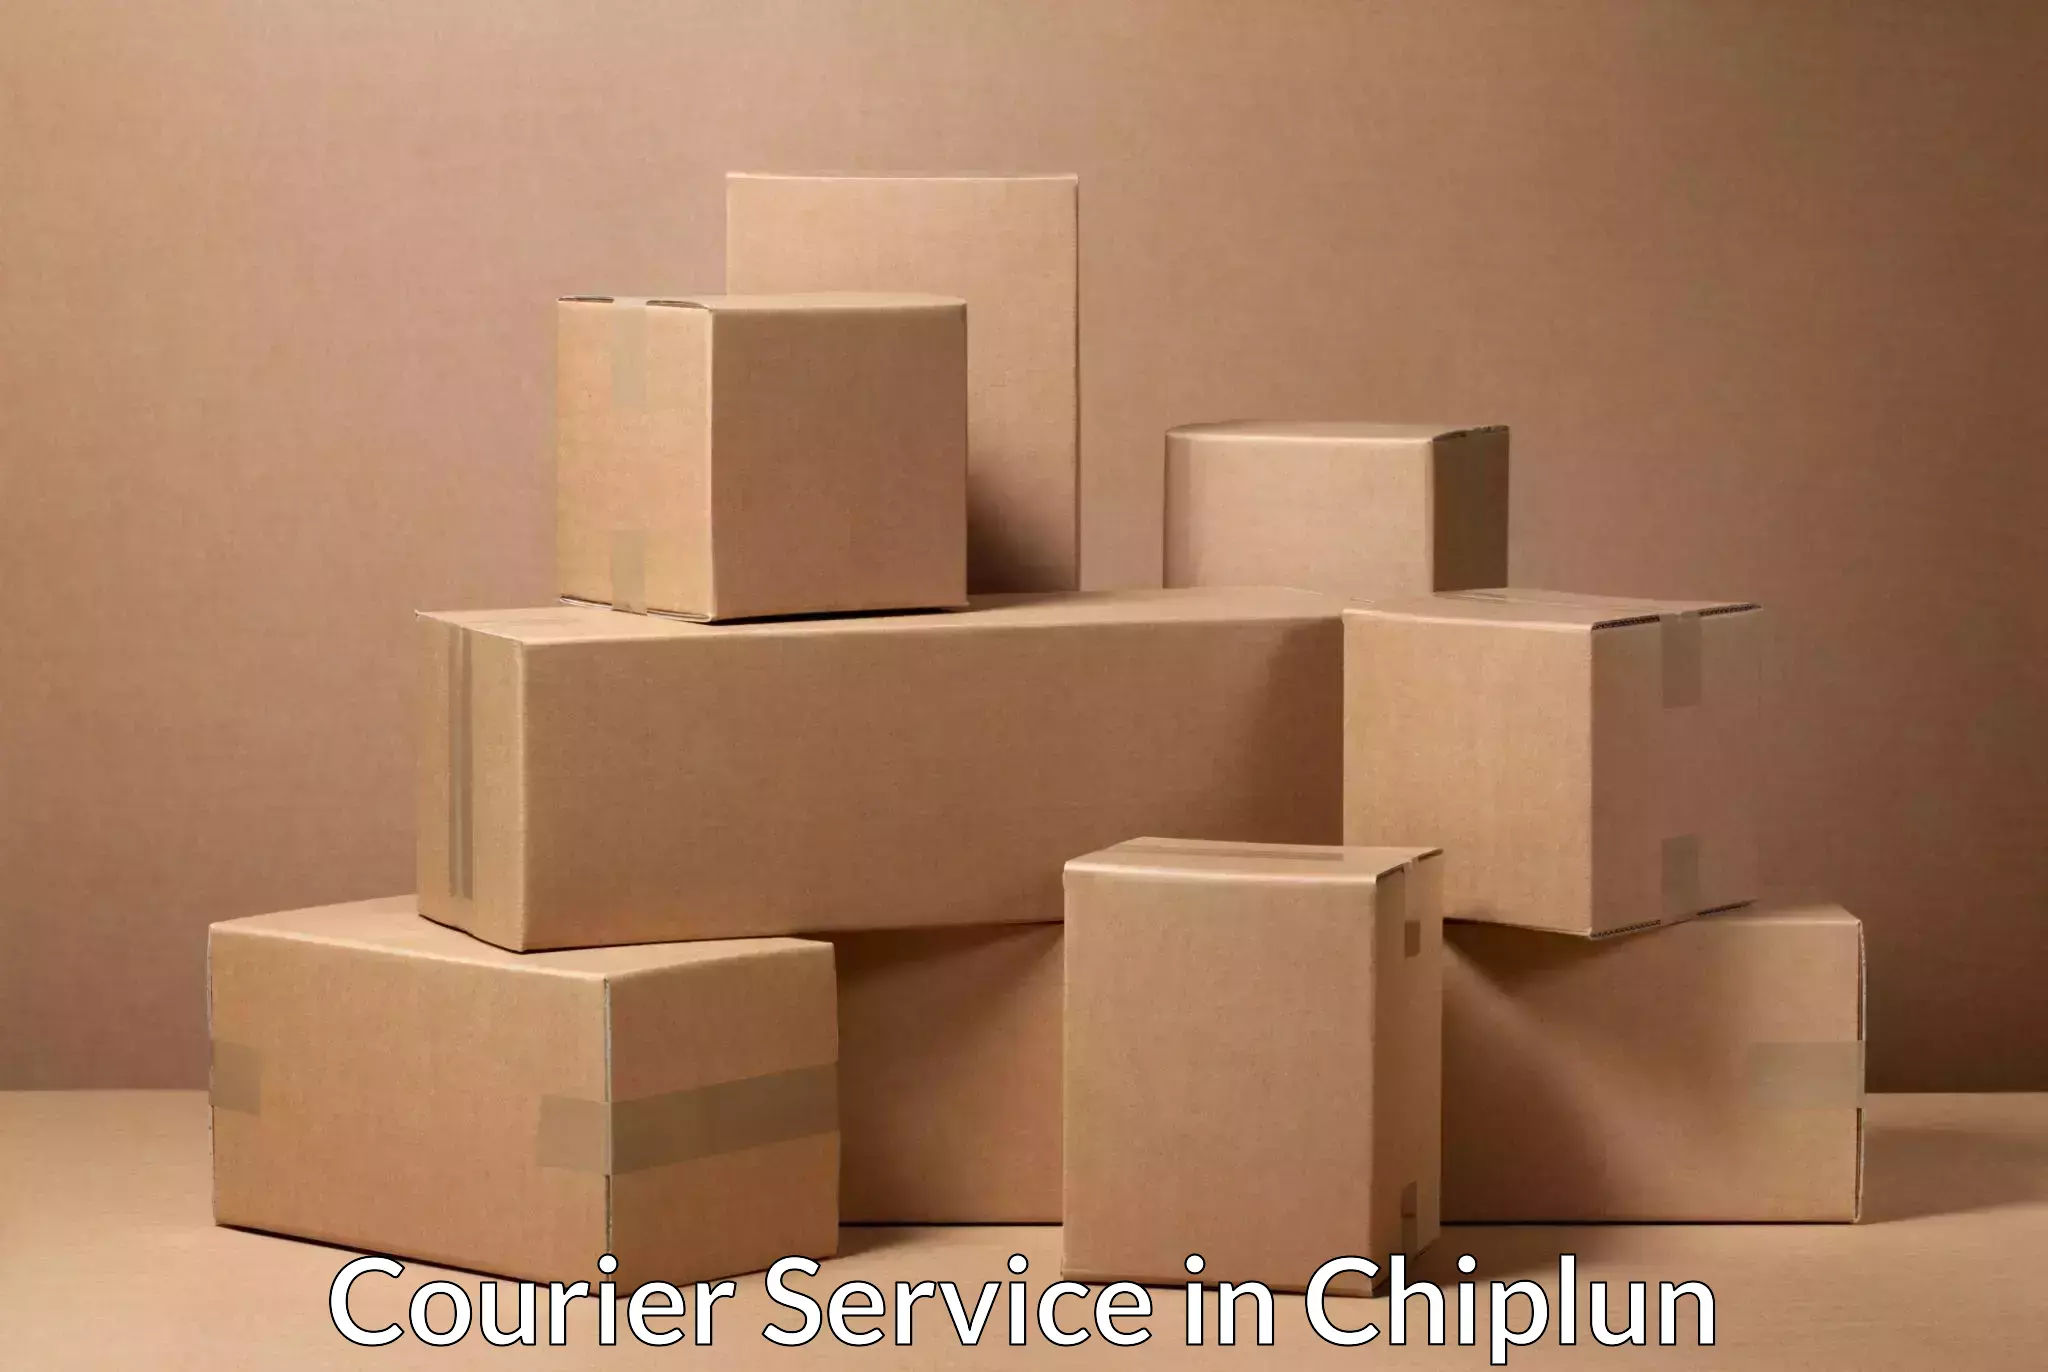 Comprehensive logistics solutions in Chiplun